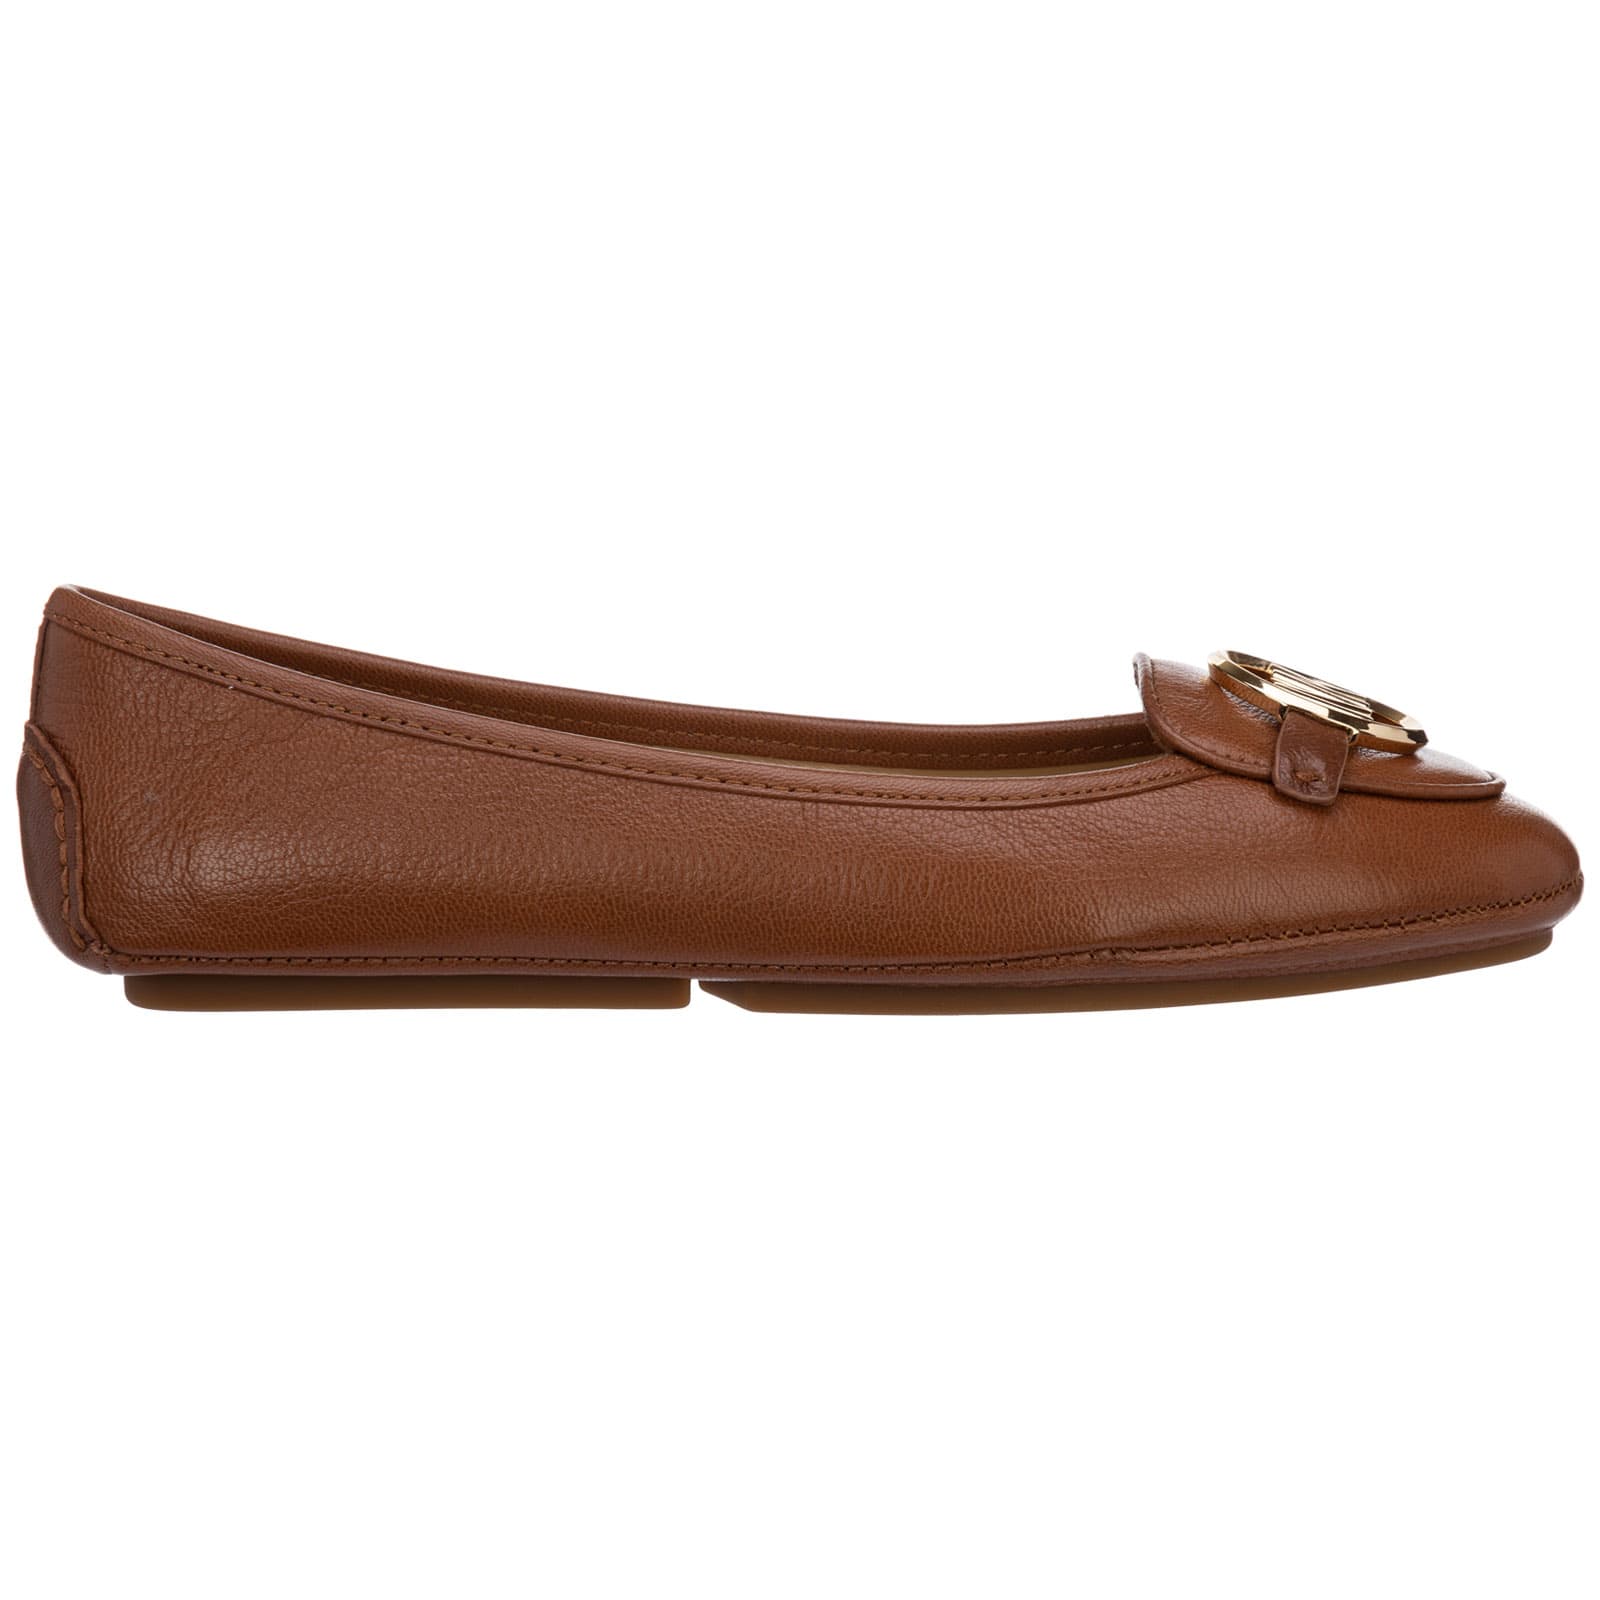 Buy Michael Kors Lillie Moccasins online, shop Michael Kors shoes with free shipping